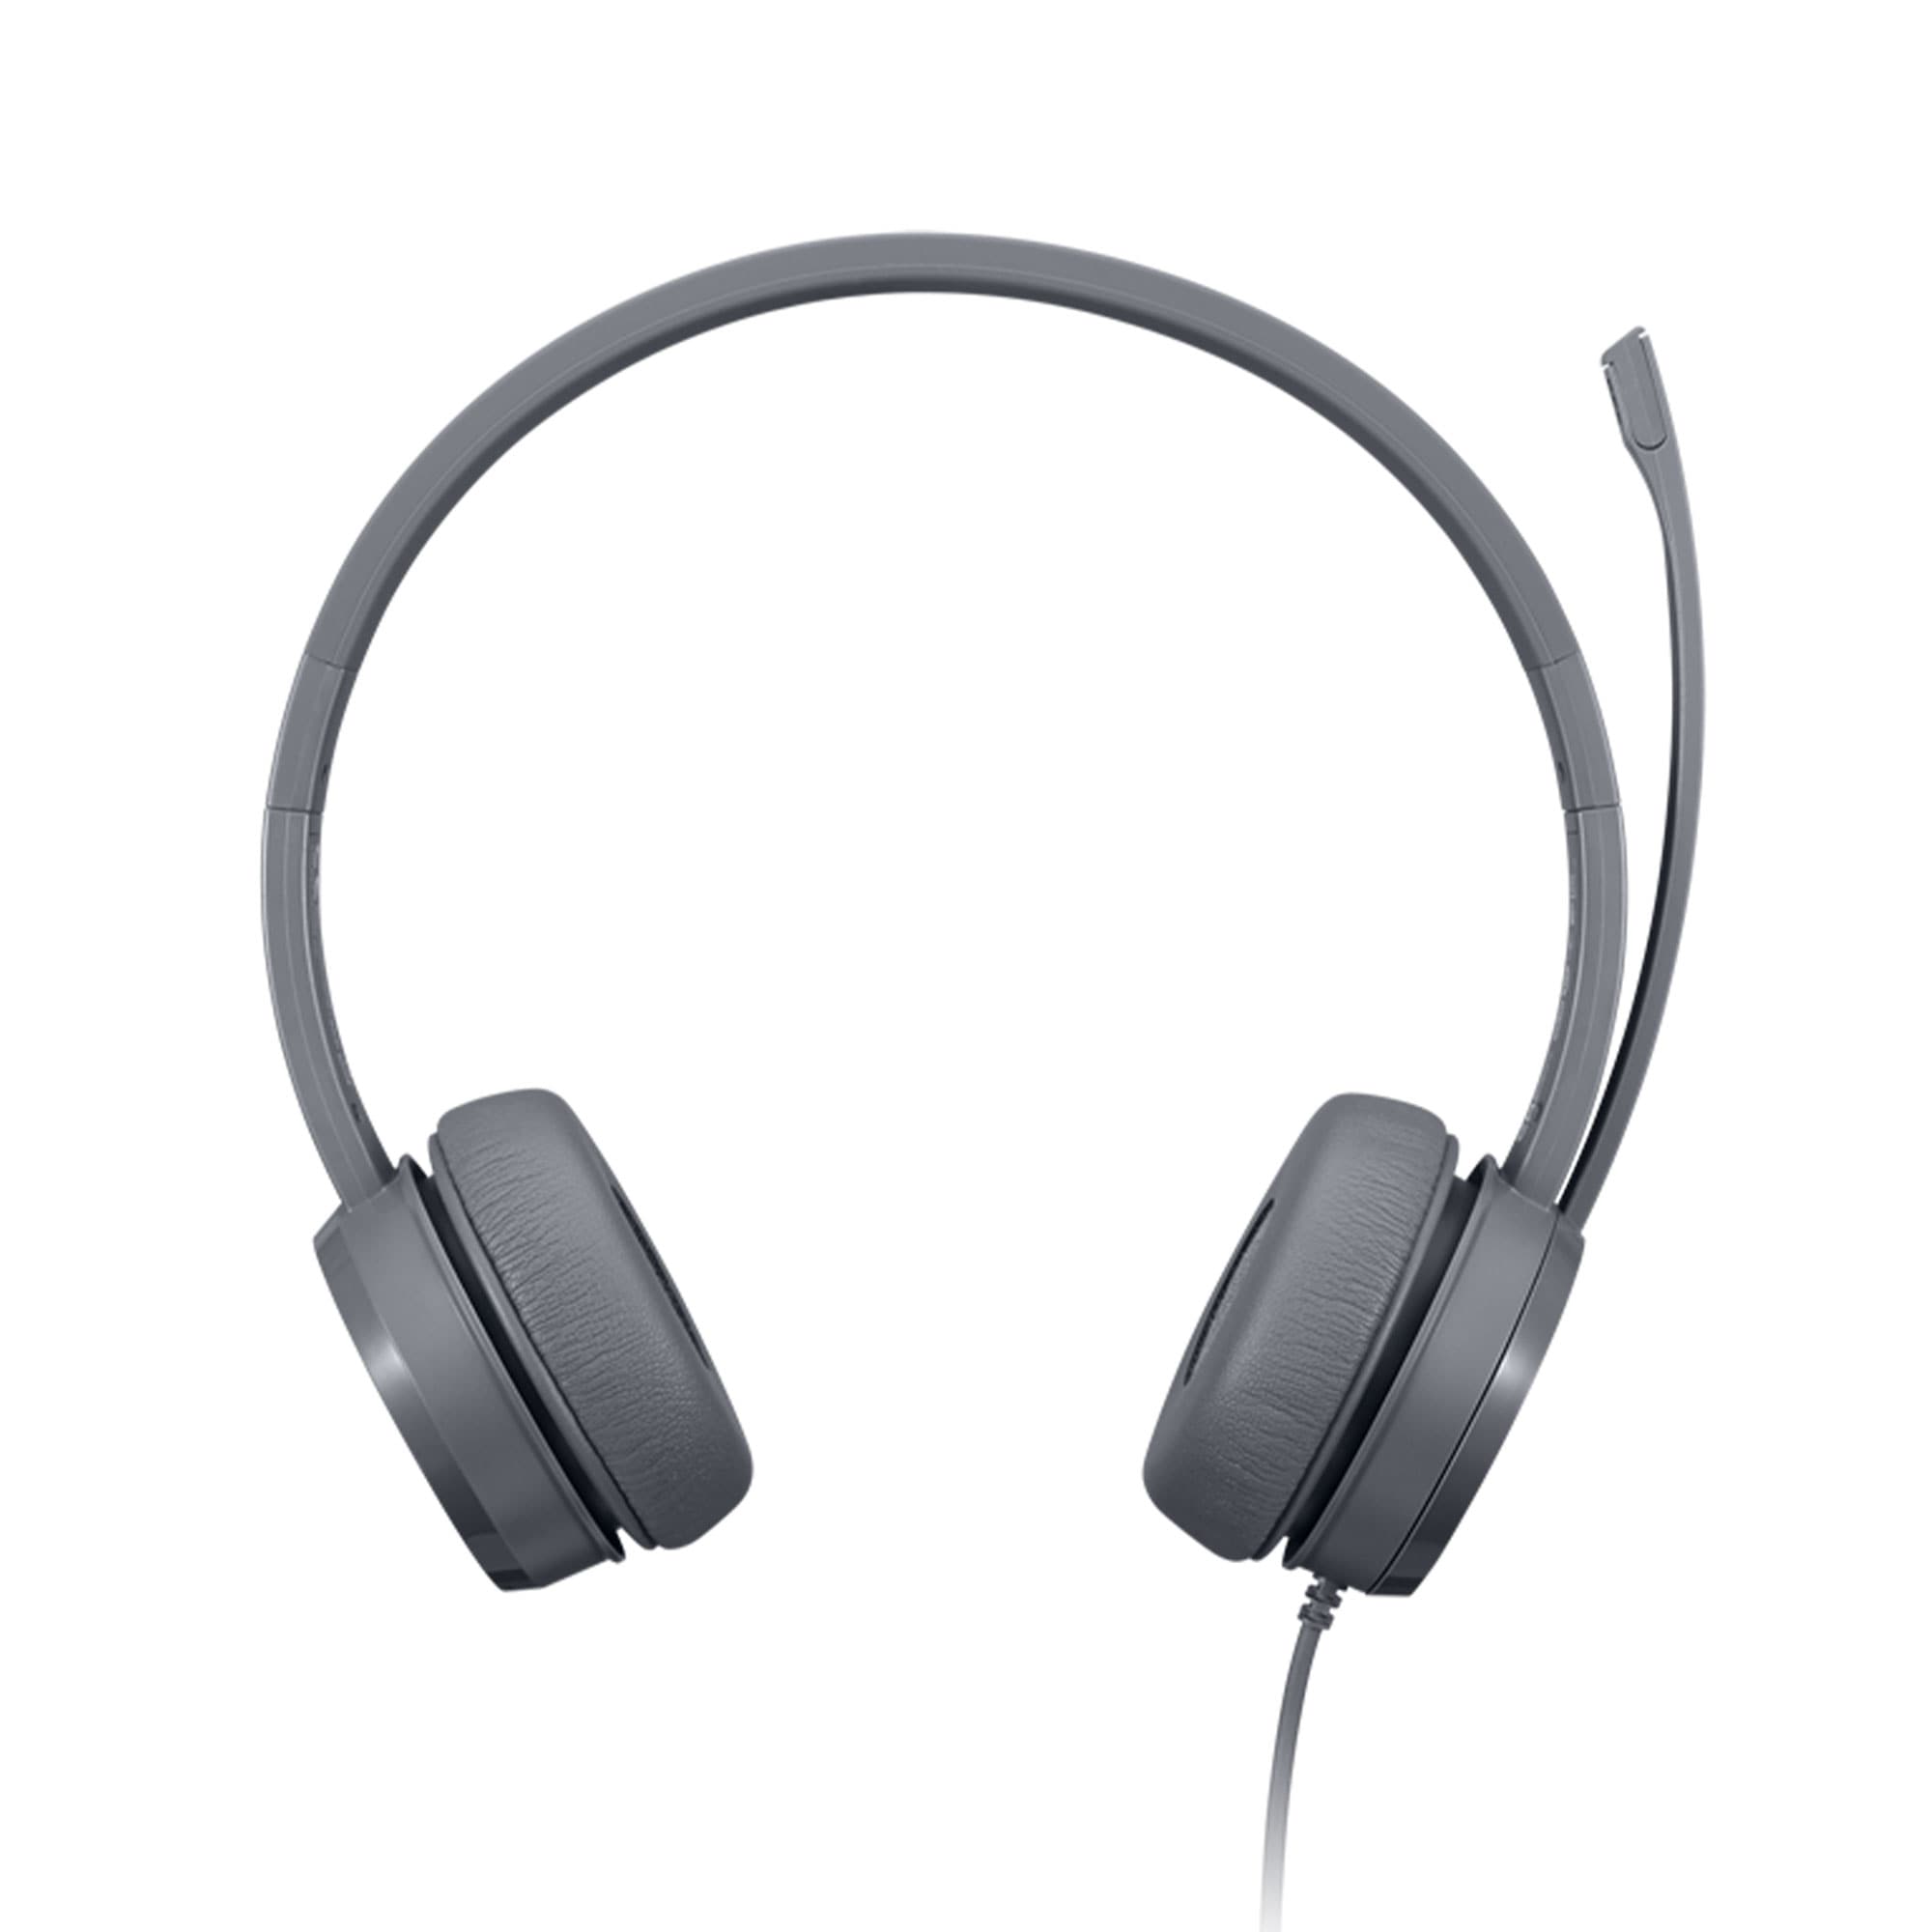 Lenovo Select USB Wired Stereo Headset - image 3 of 5